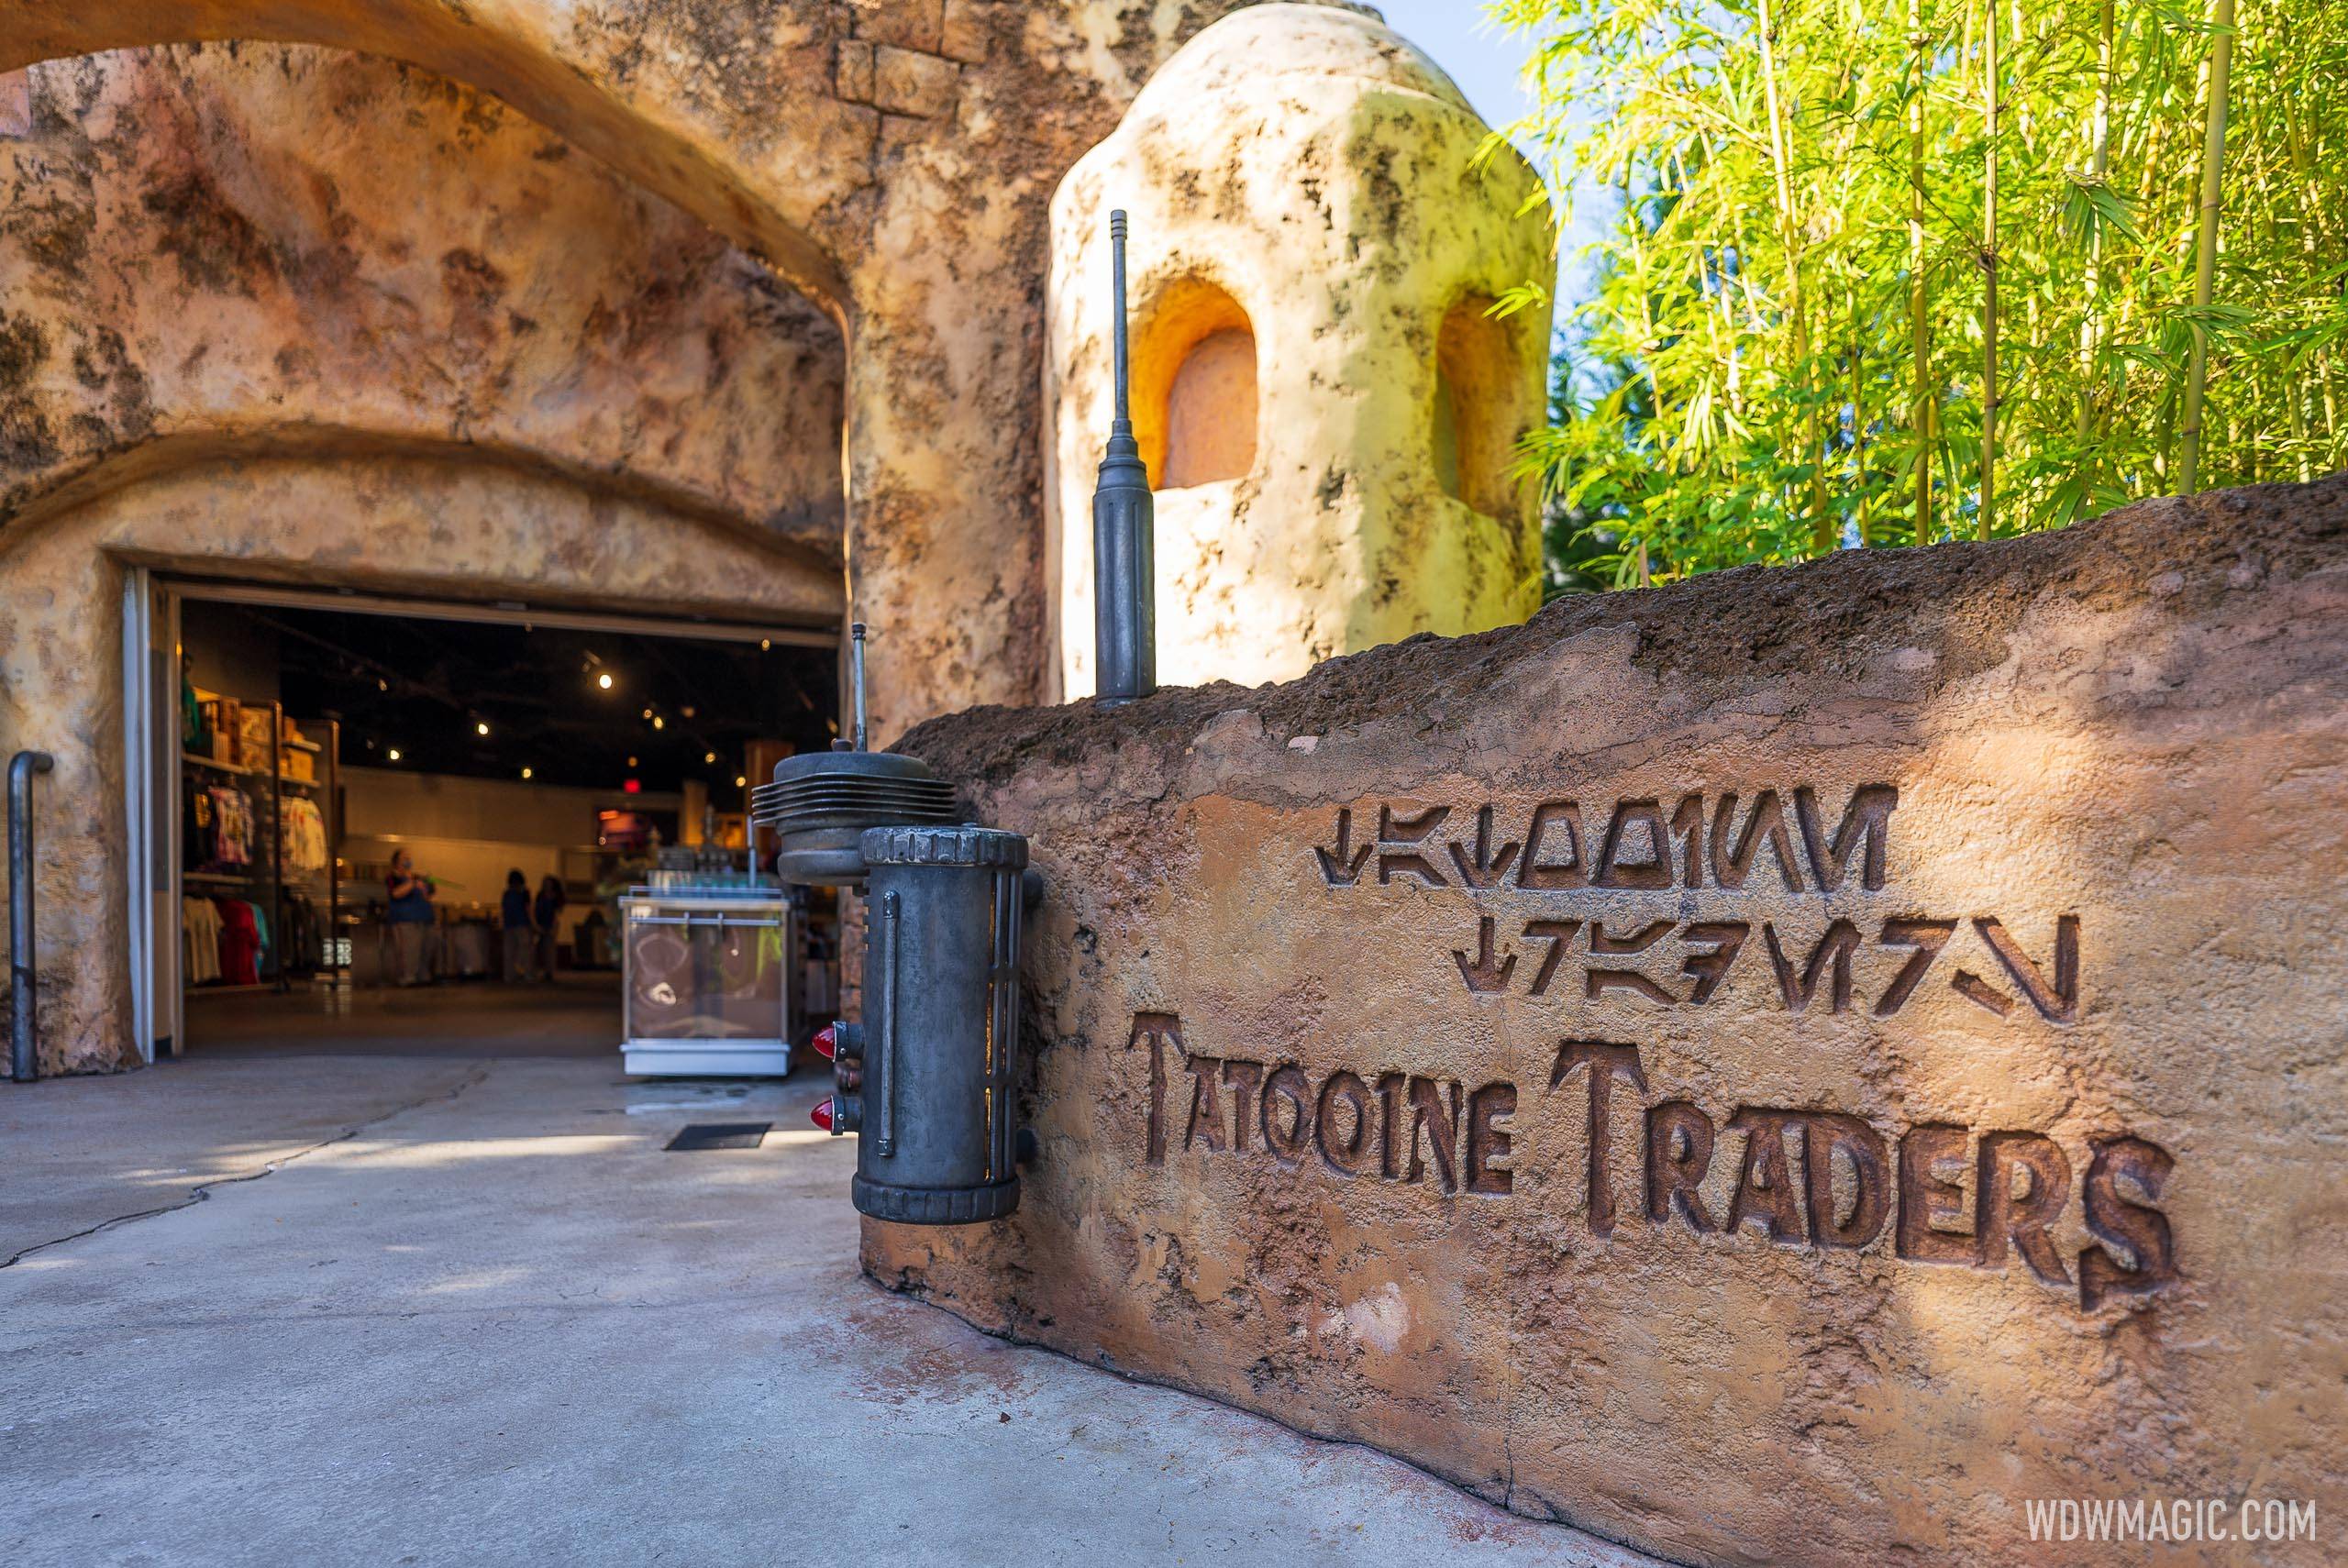 MagicBand+ is available at Tatooine Traders in limited quanities